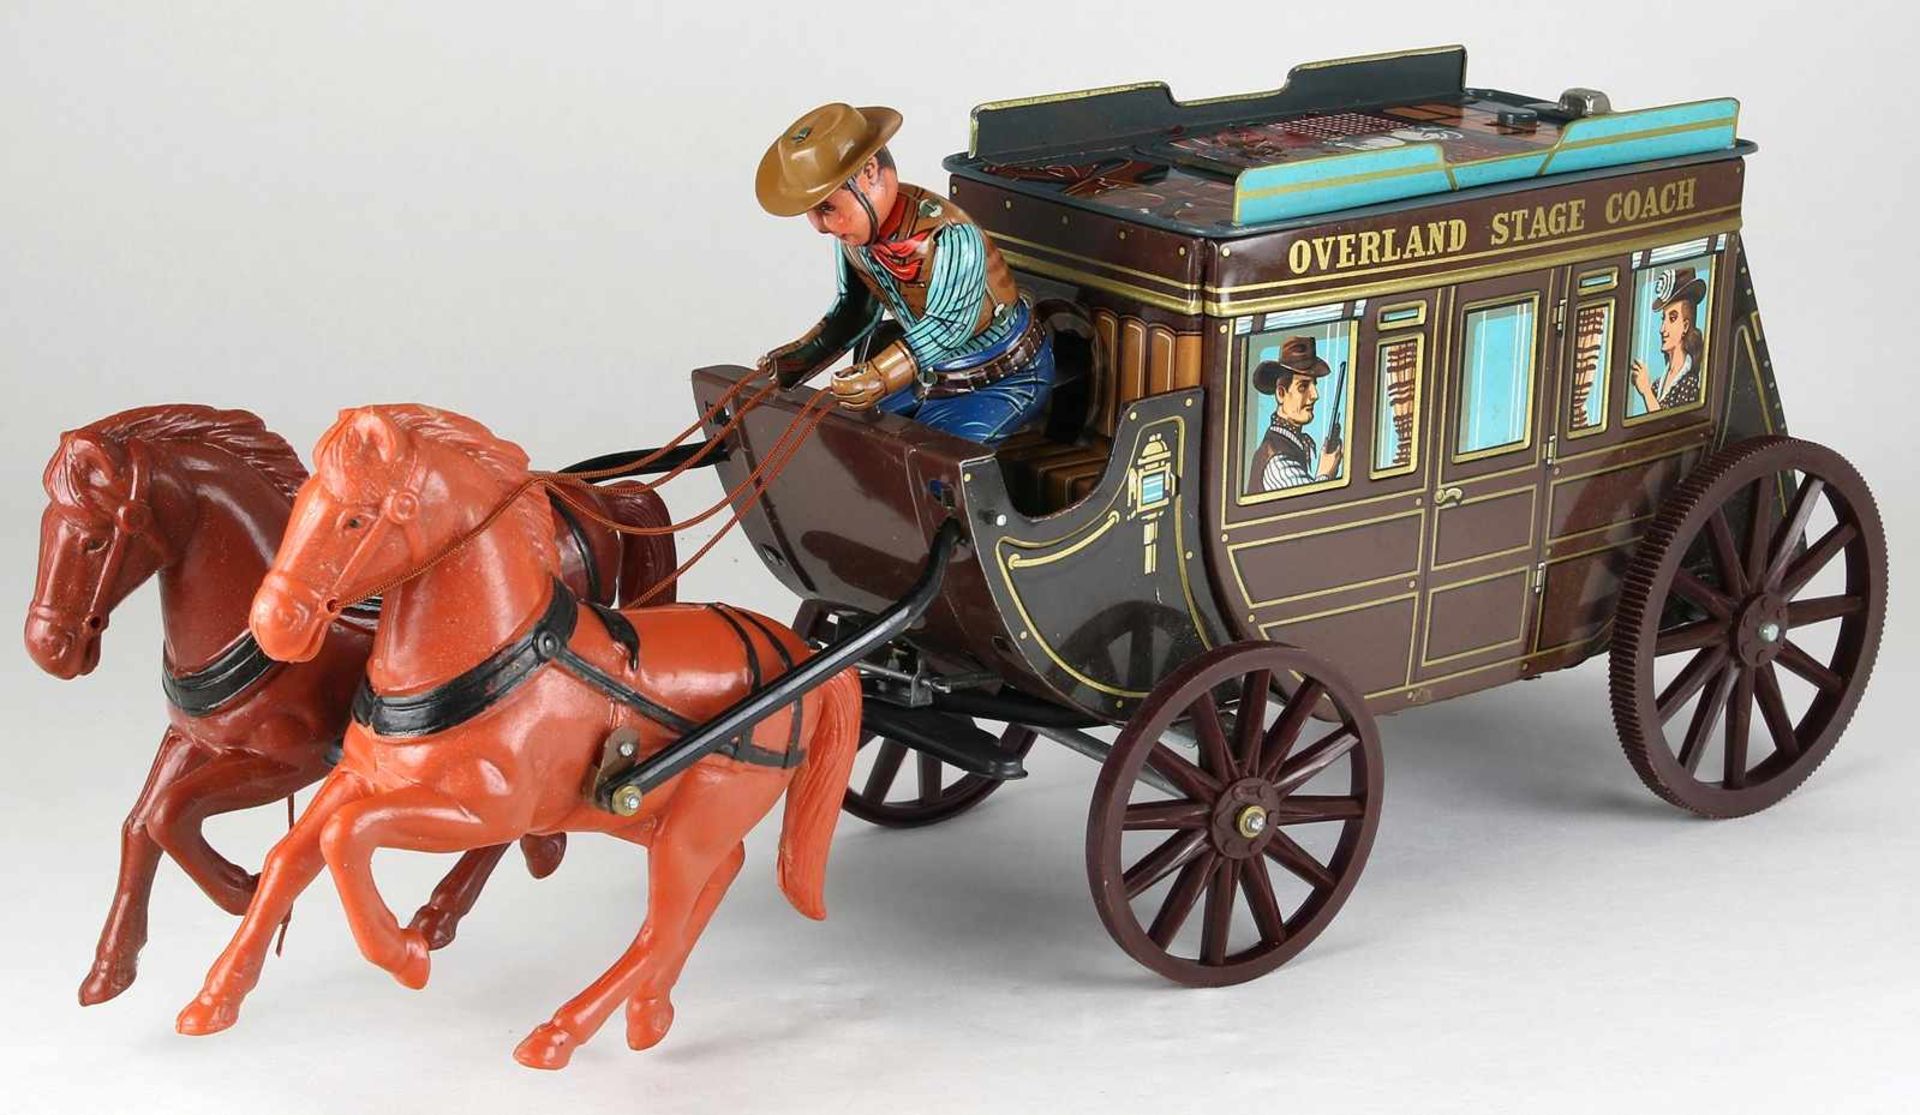 Overland Stage Coach